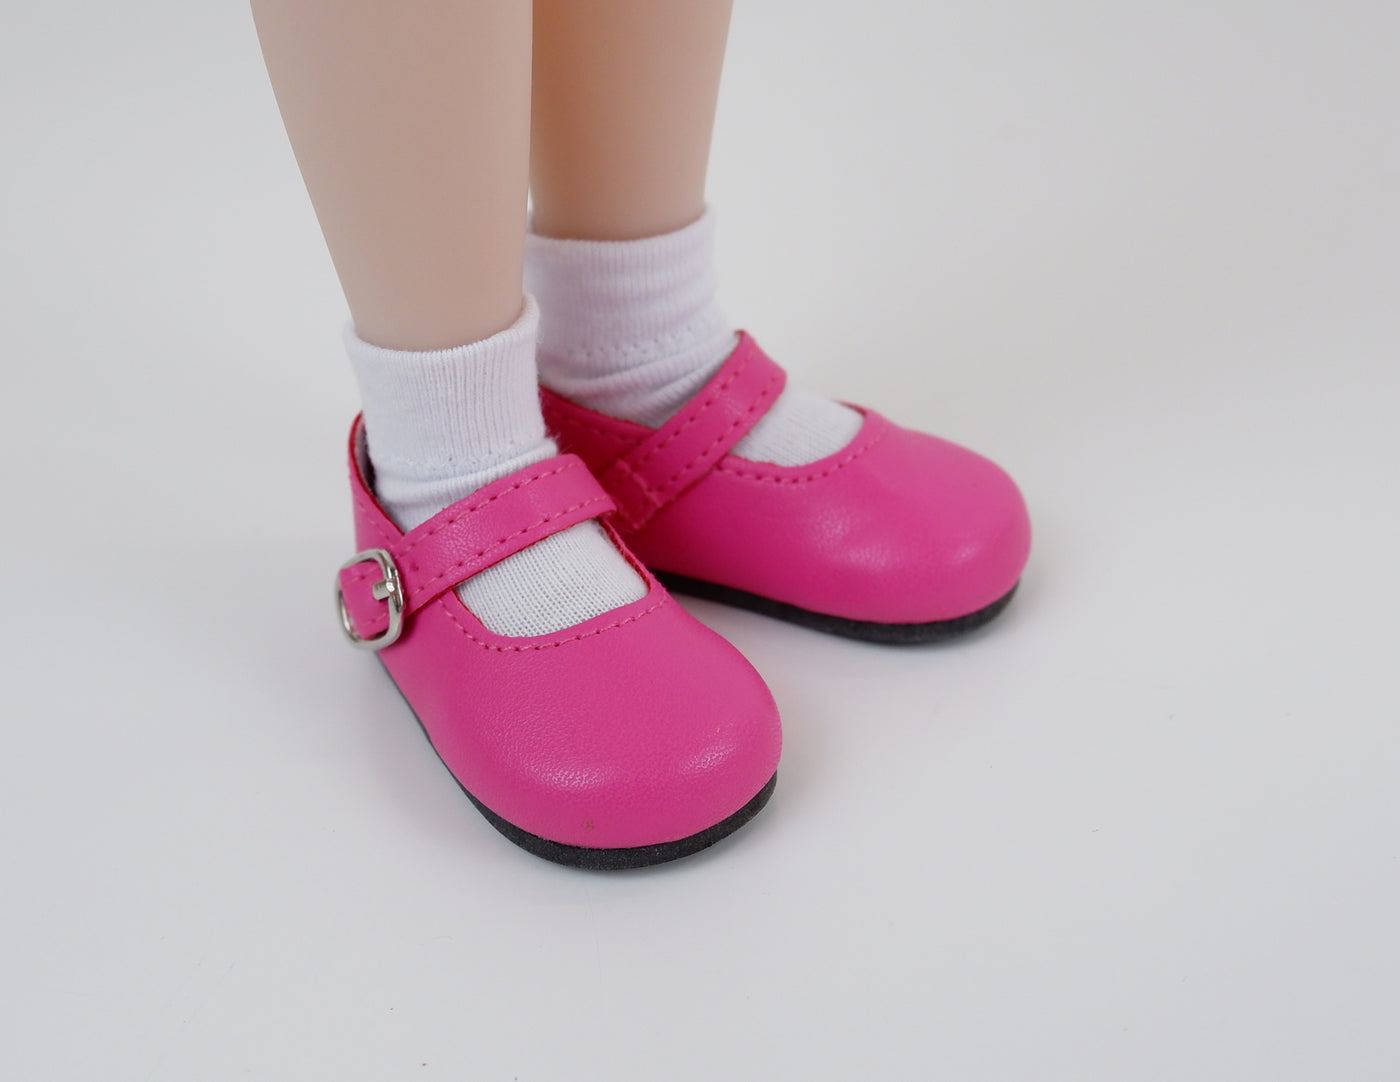 Simple Mary Jane Shoes - Dark Pink